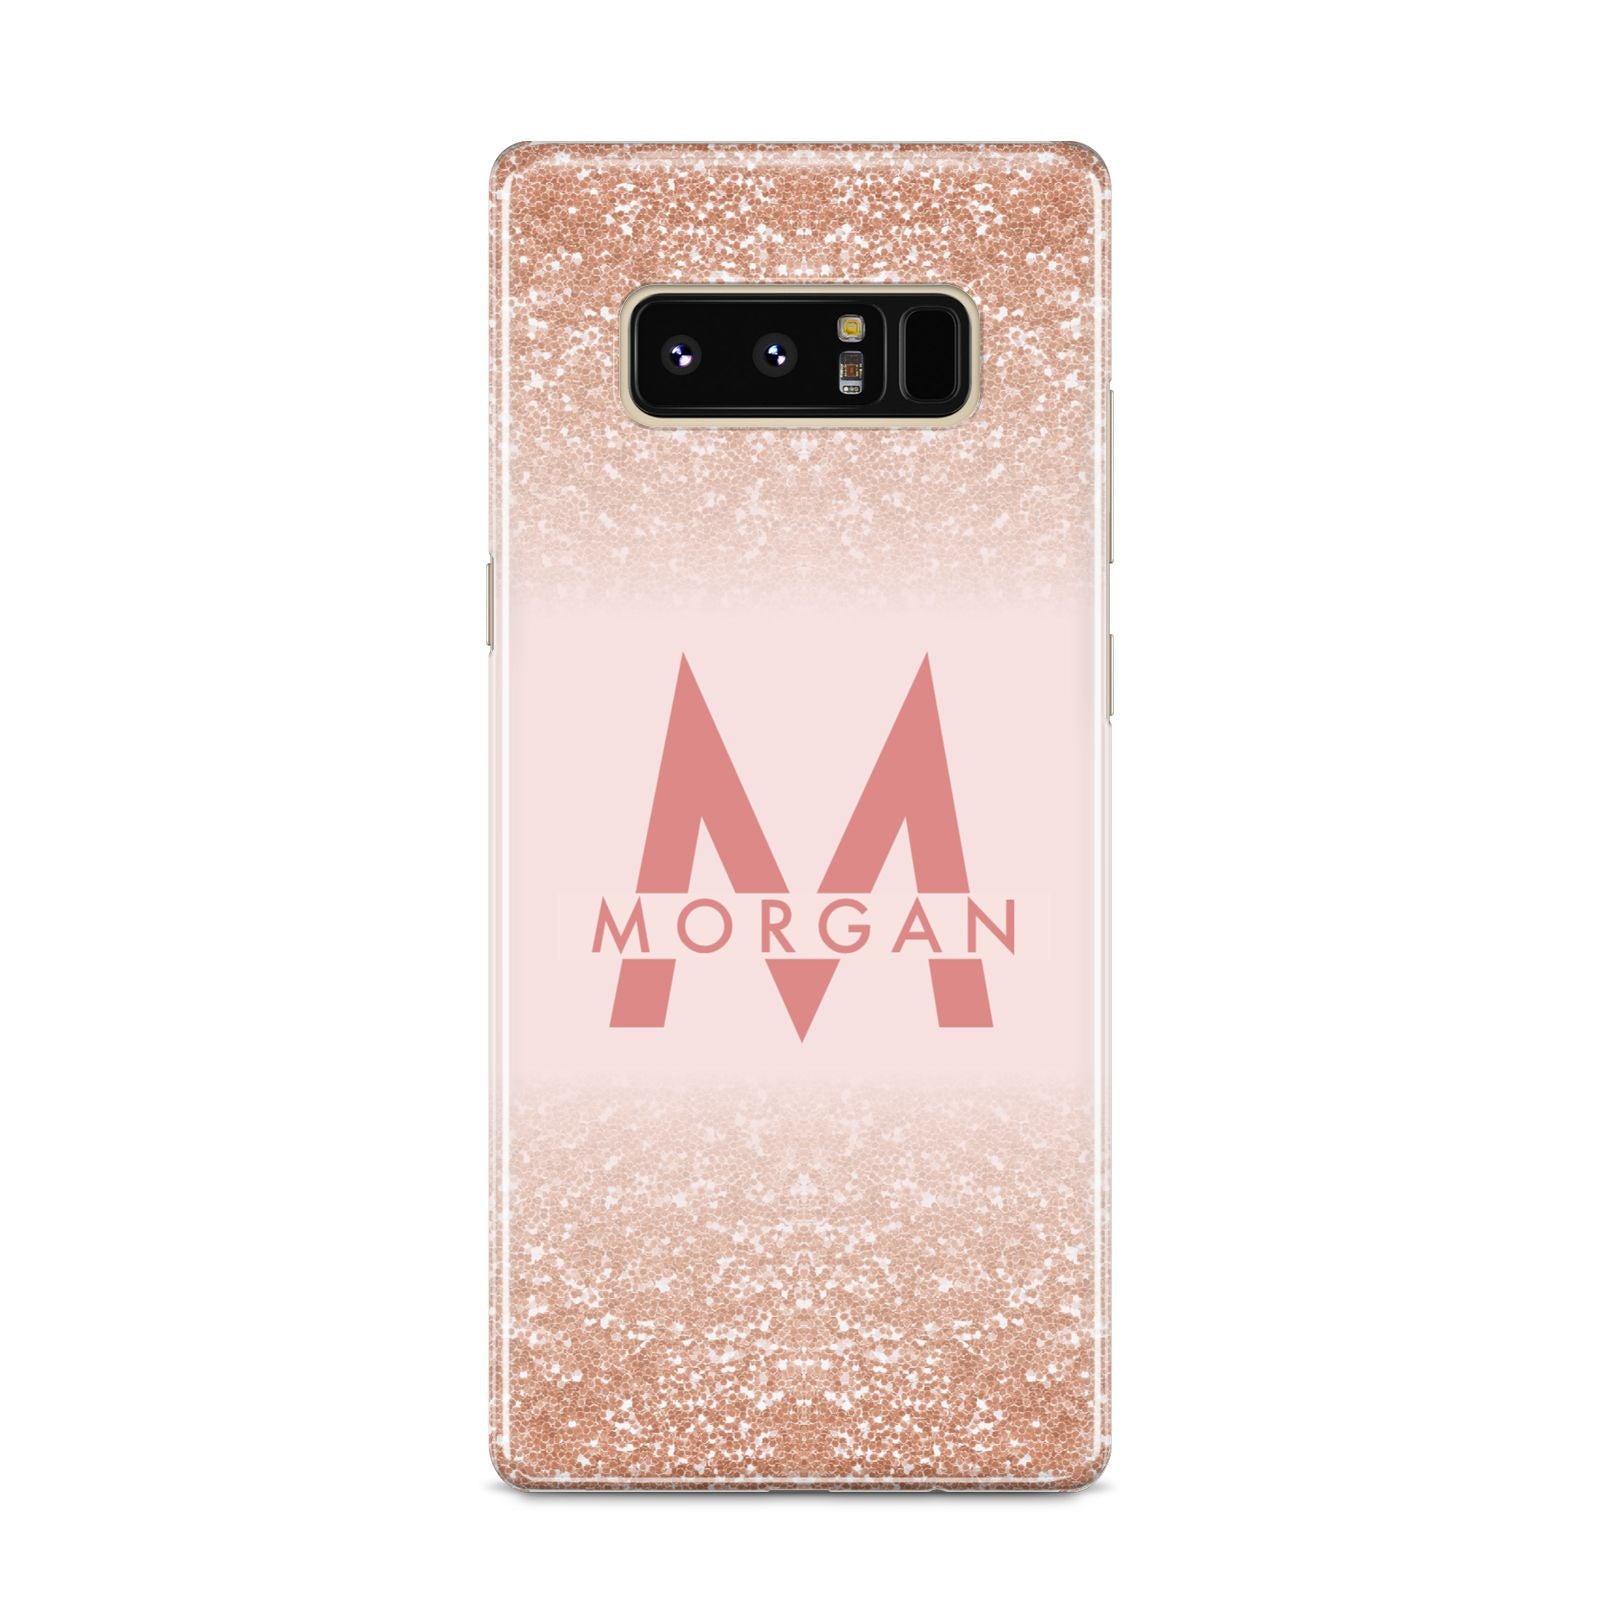 Personalised Printed Glitter Name Initials Samsung Galaxy S8 Case